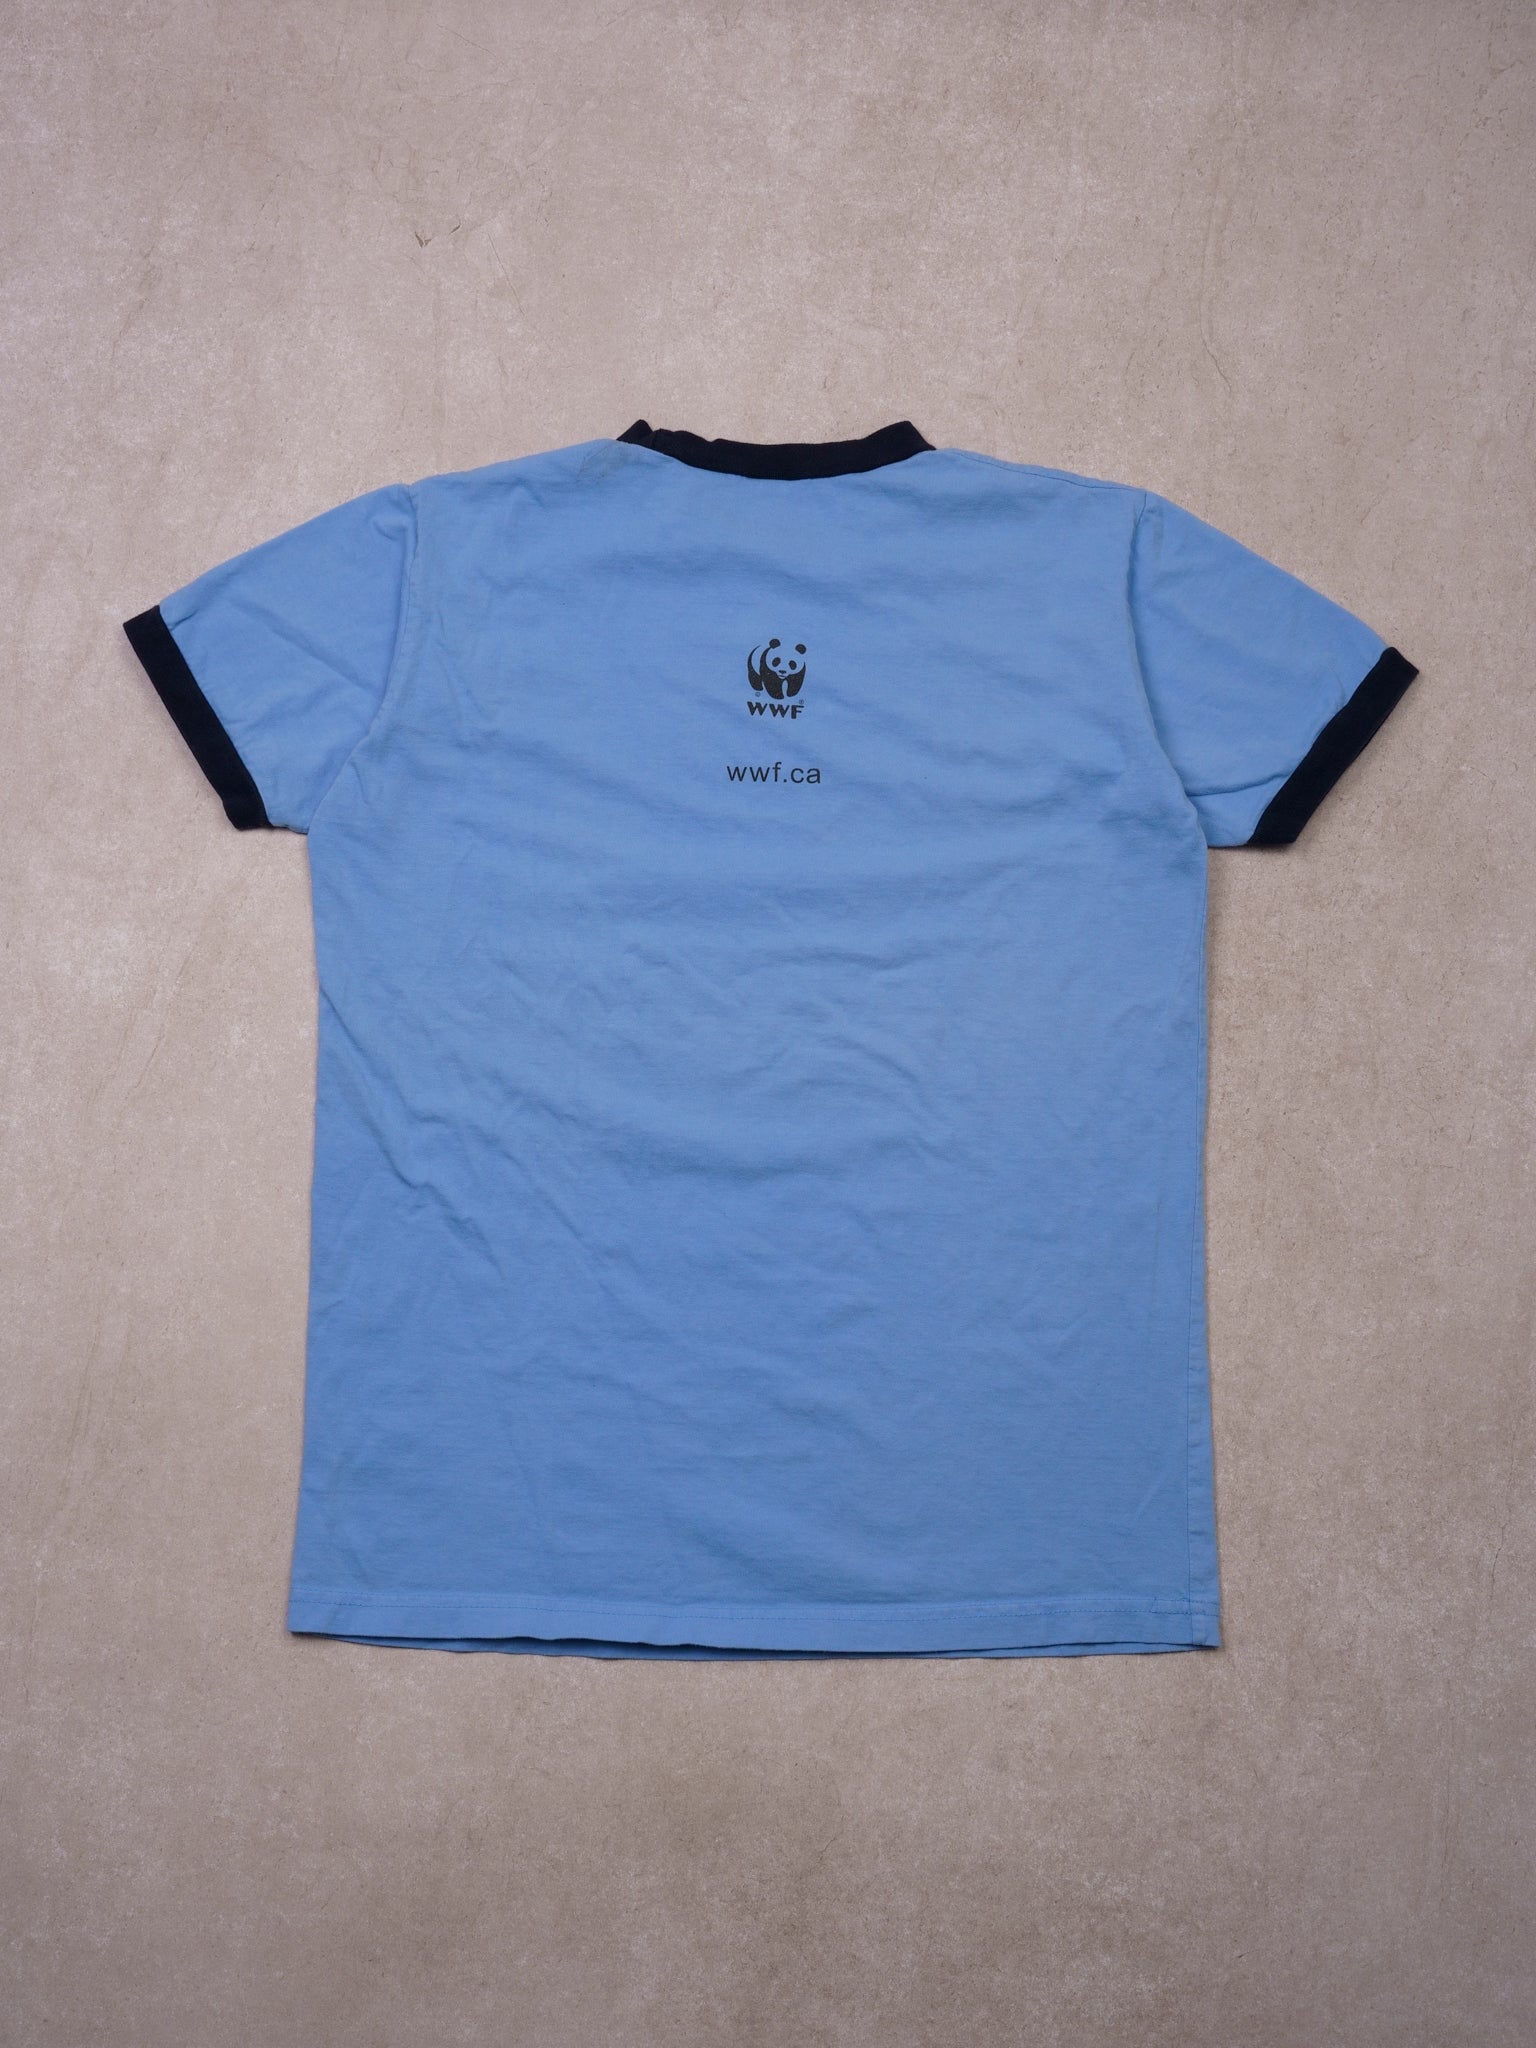 Vintage 90s Baby Blue "Hotter than I should be" Tee (M)